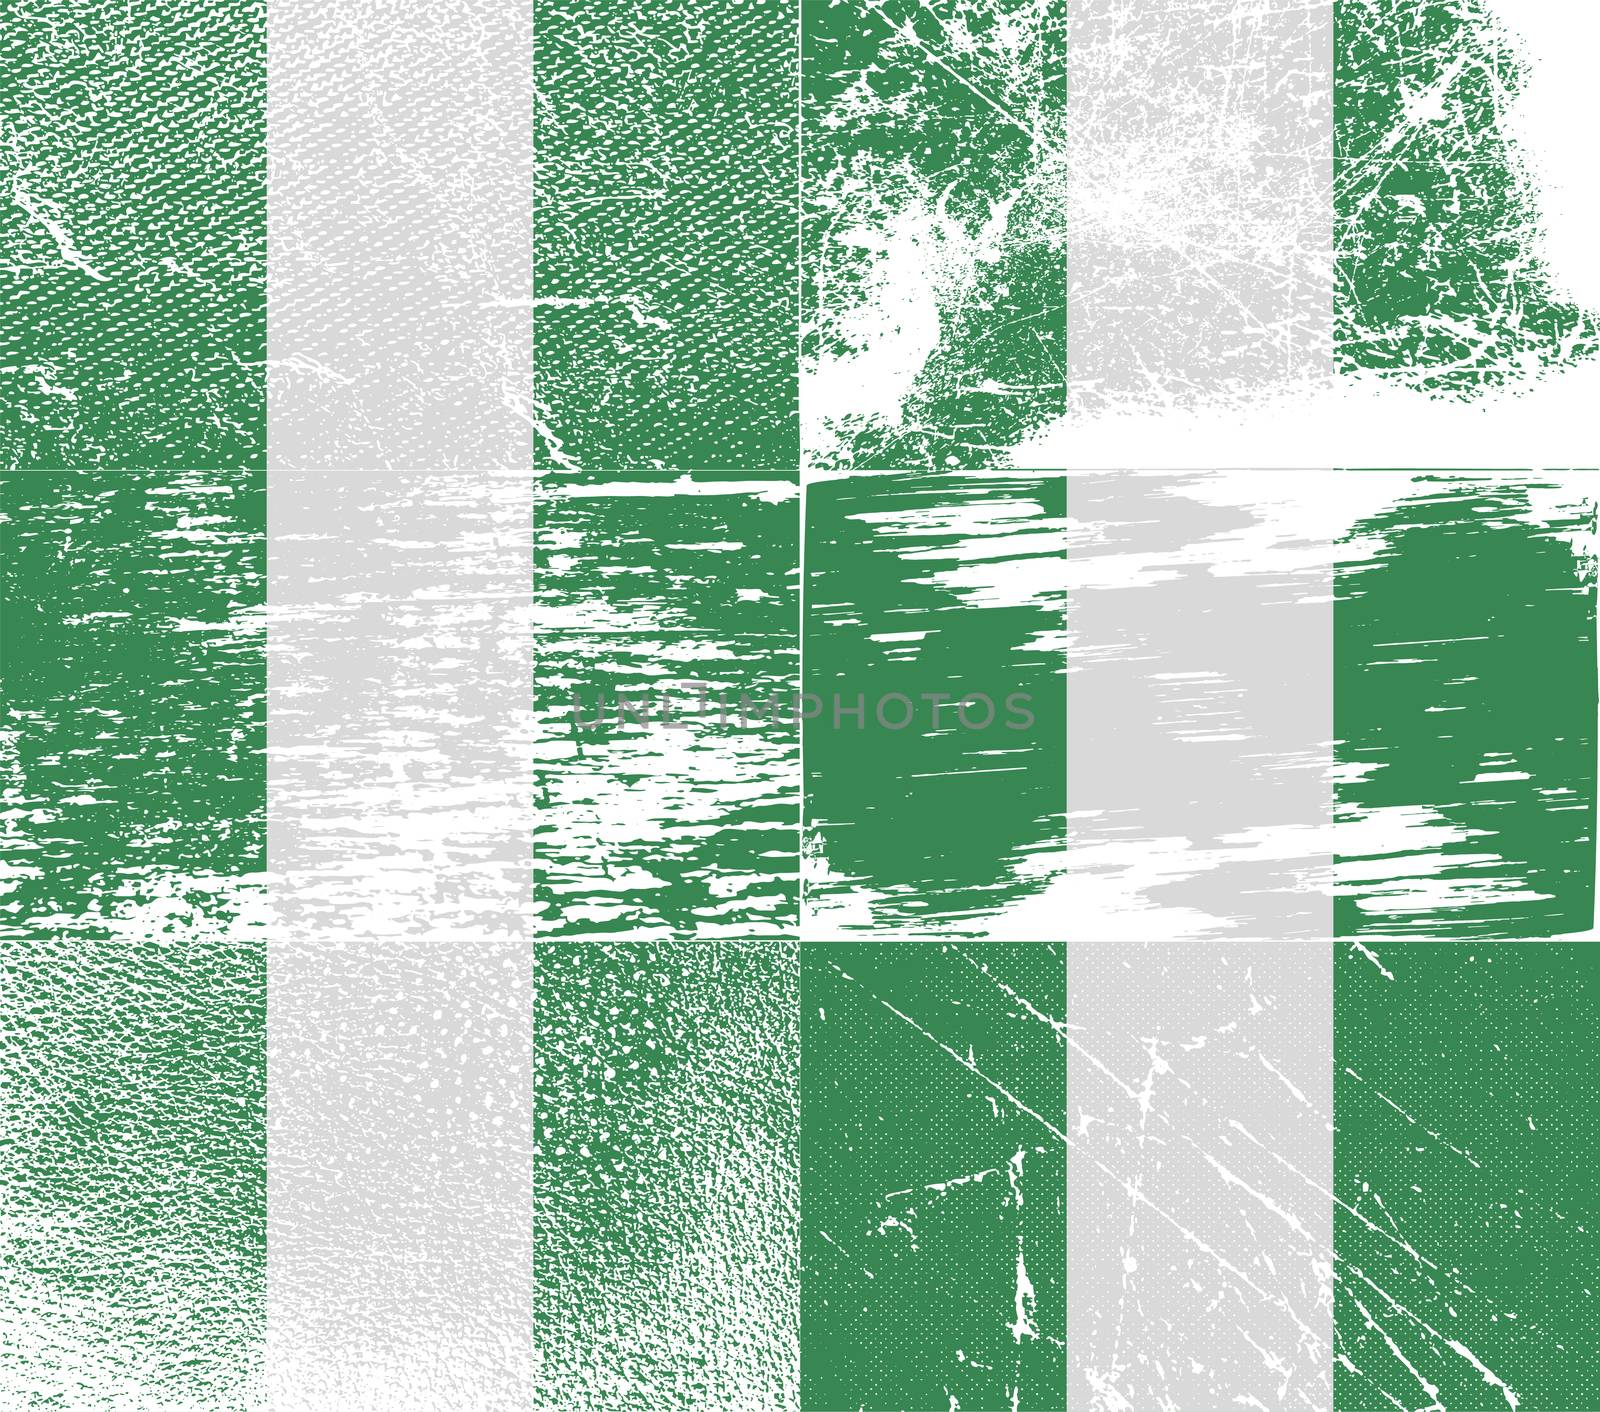 Flag of Nigeria with old texture.  illustration